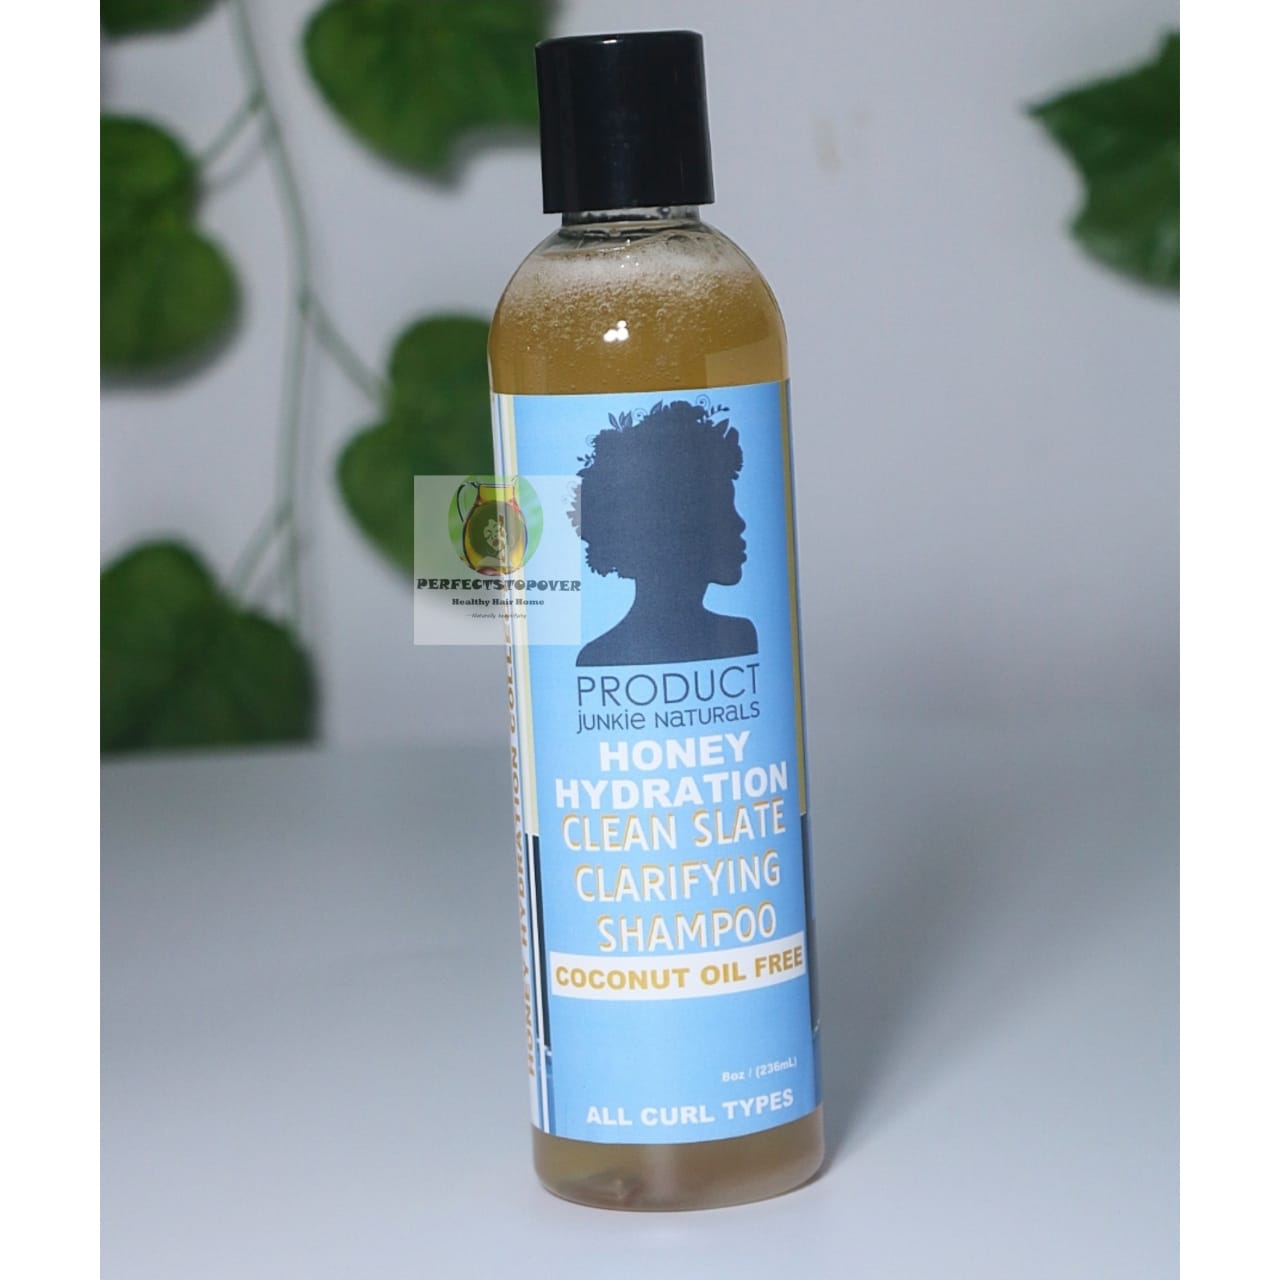 PRODUCT jUNKie NaTURaLS HONEY HYDRATE CLEAN SLATE CLARIFYING SHAMPOO 